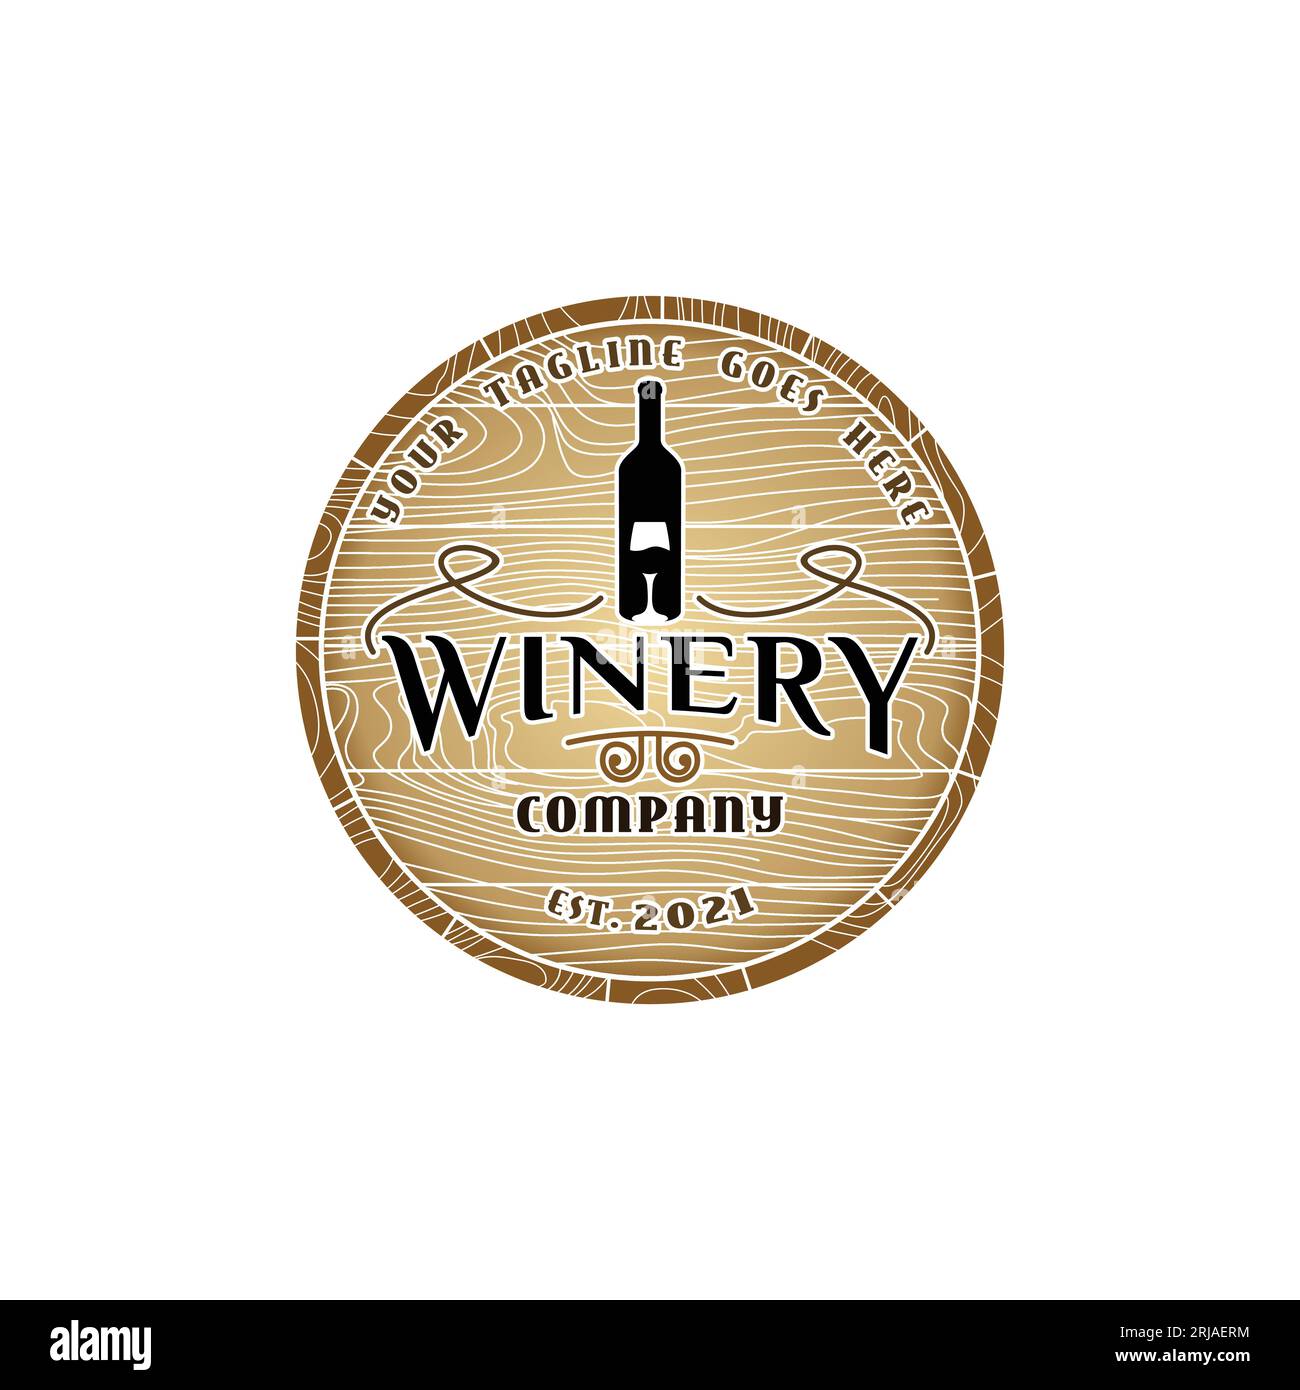 Vintage Winery Logo, Wooden Barrel With Glass and Wine Bottle Icon Vector Stock Vector